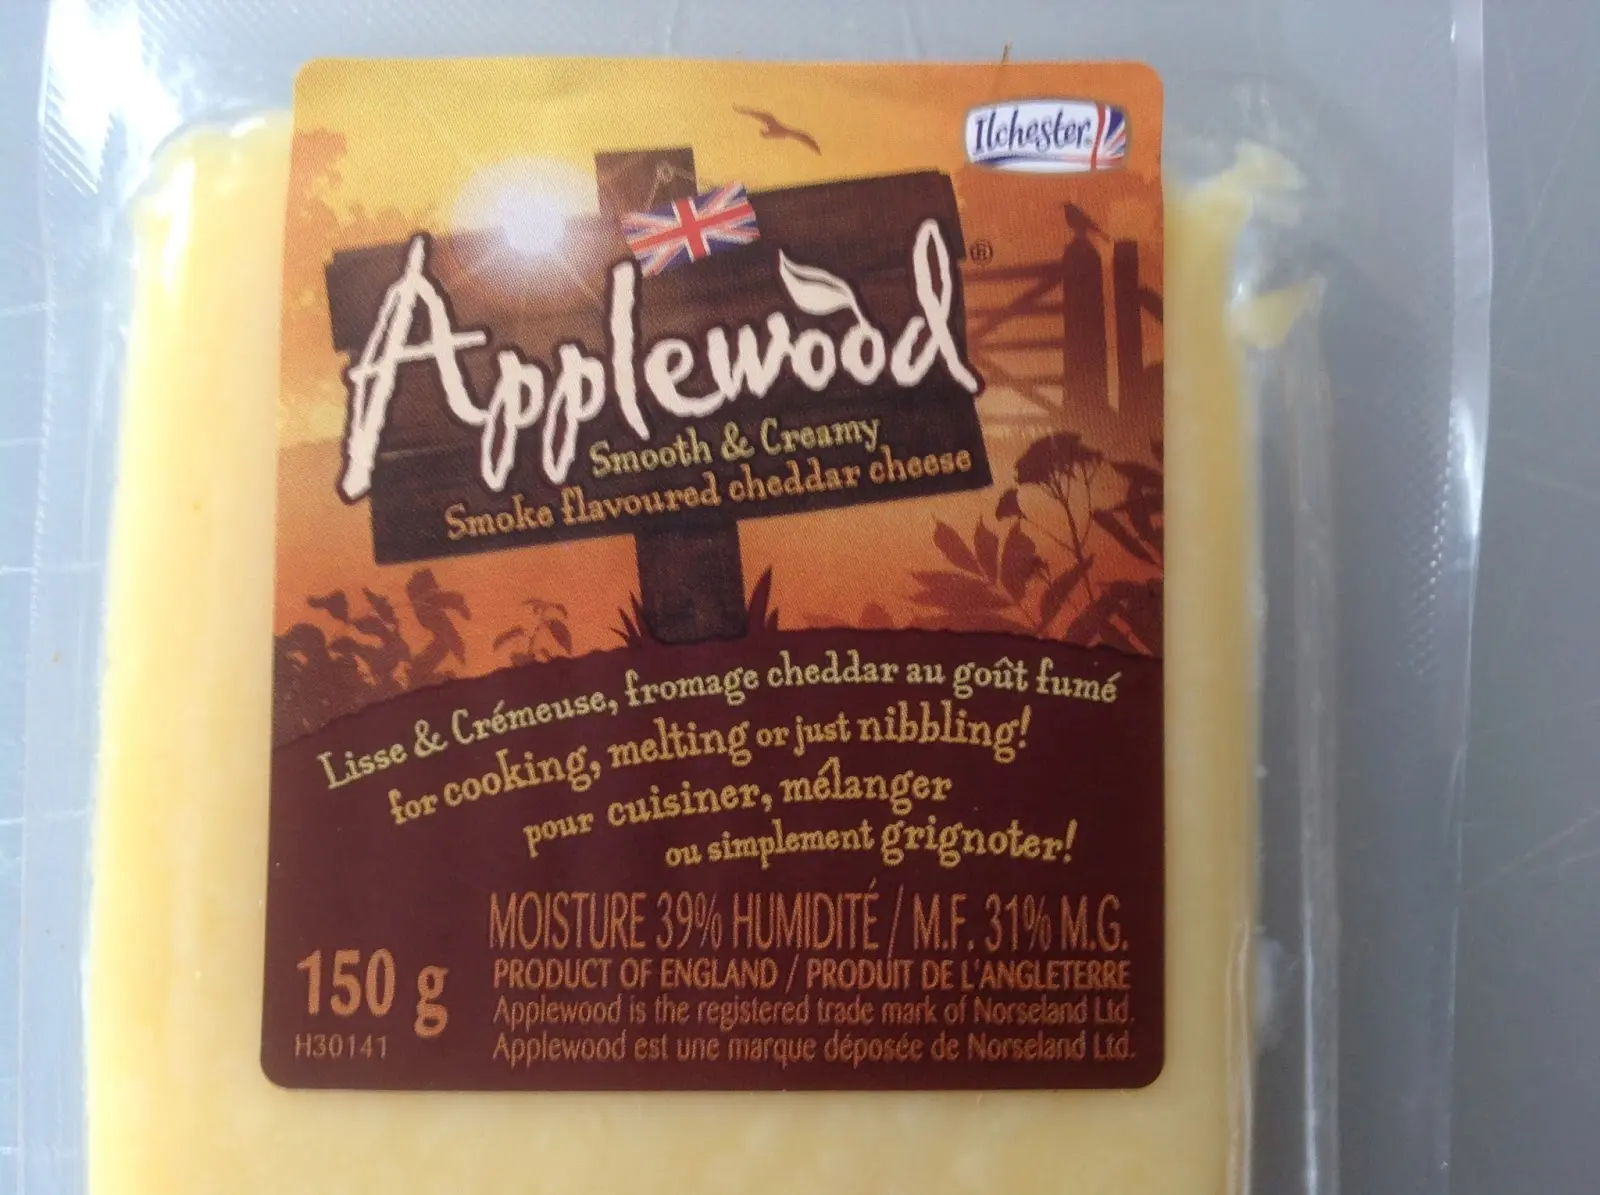 ilchester applewood smoked cheddar - How many calories are in Ilchester Applewood smoked cheddar